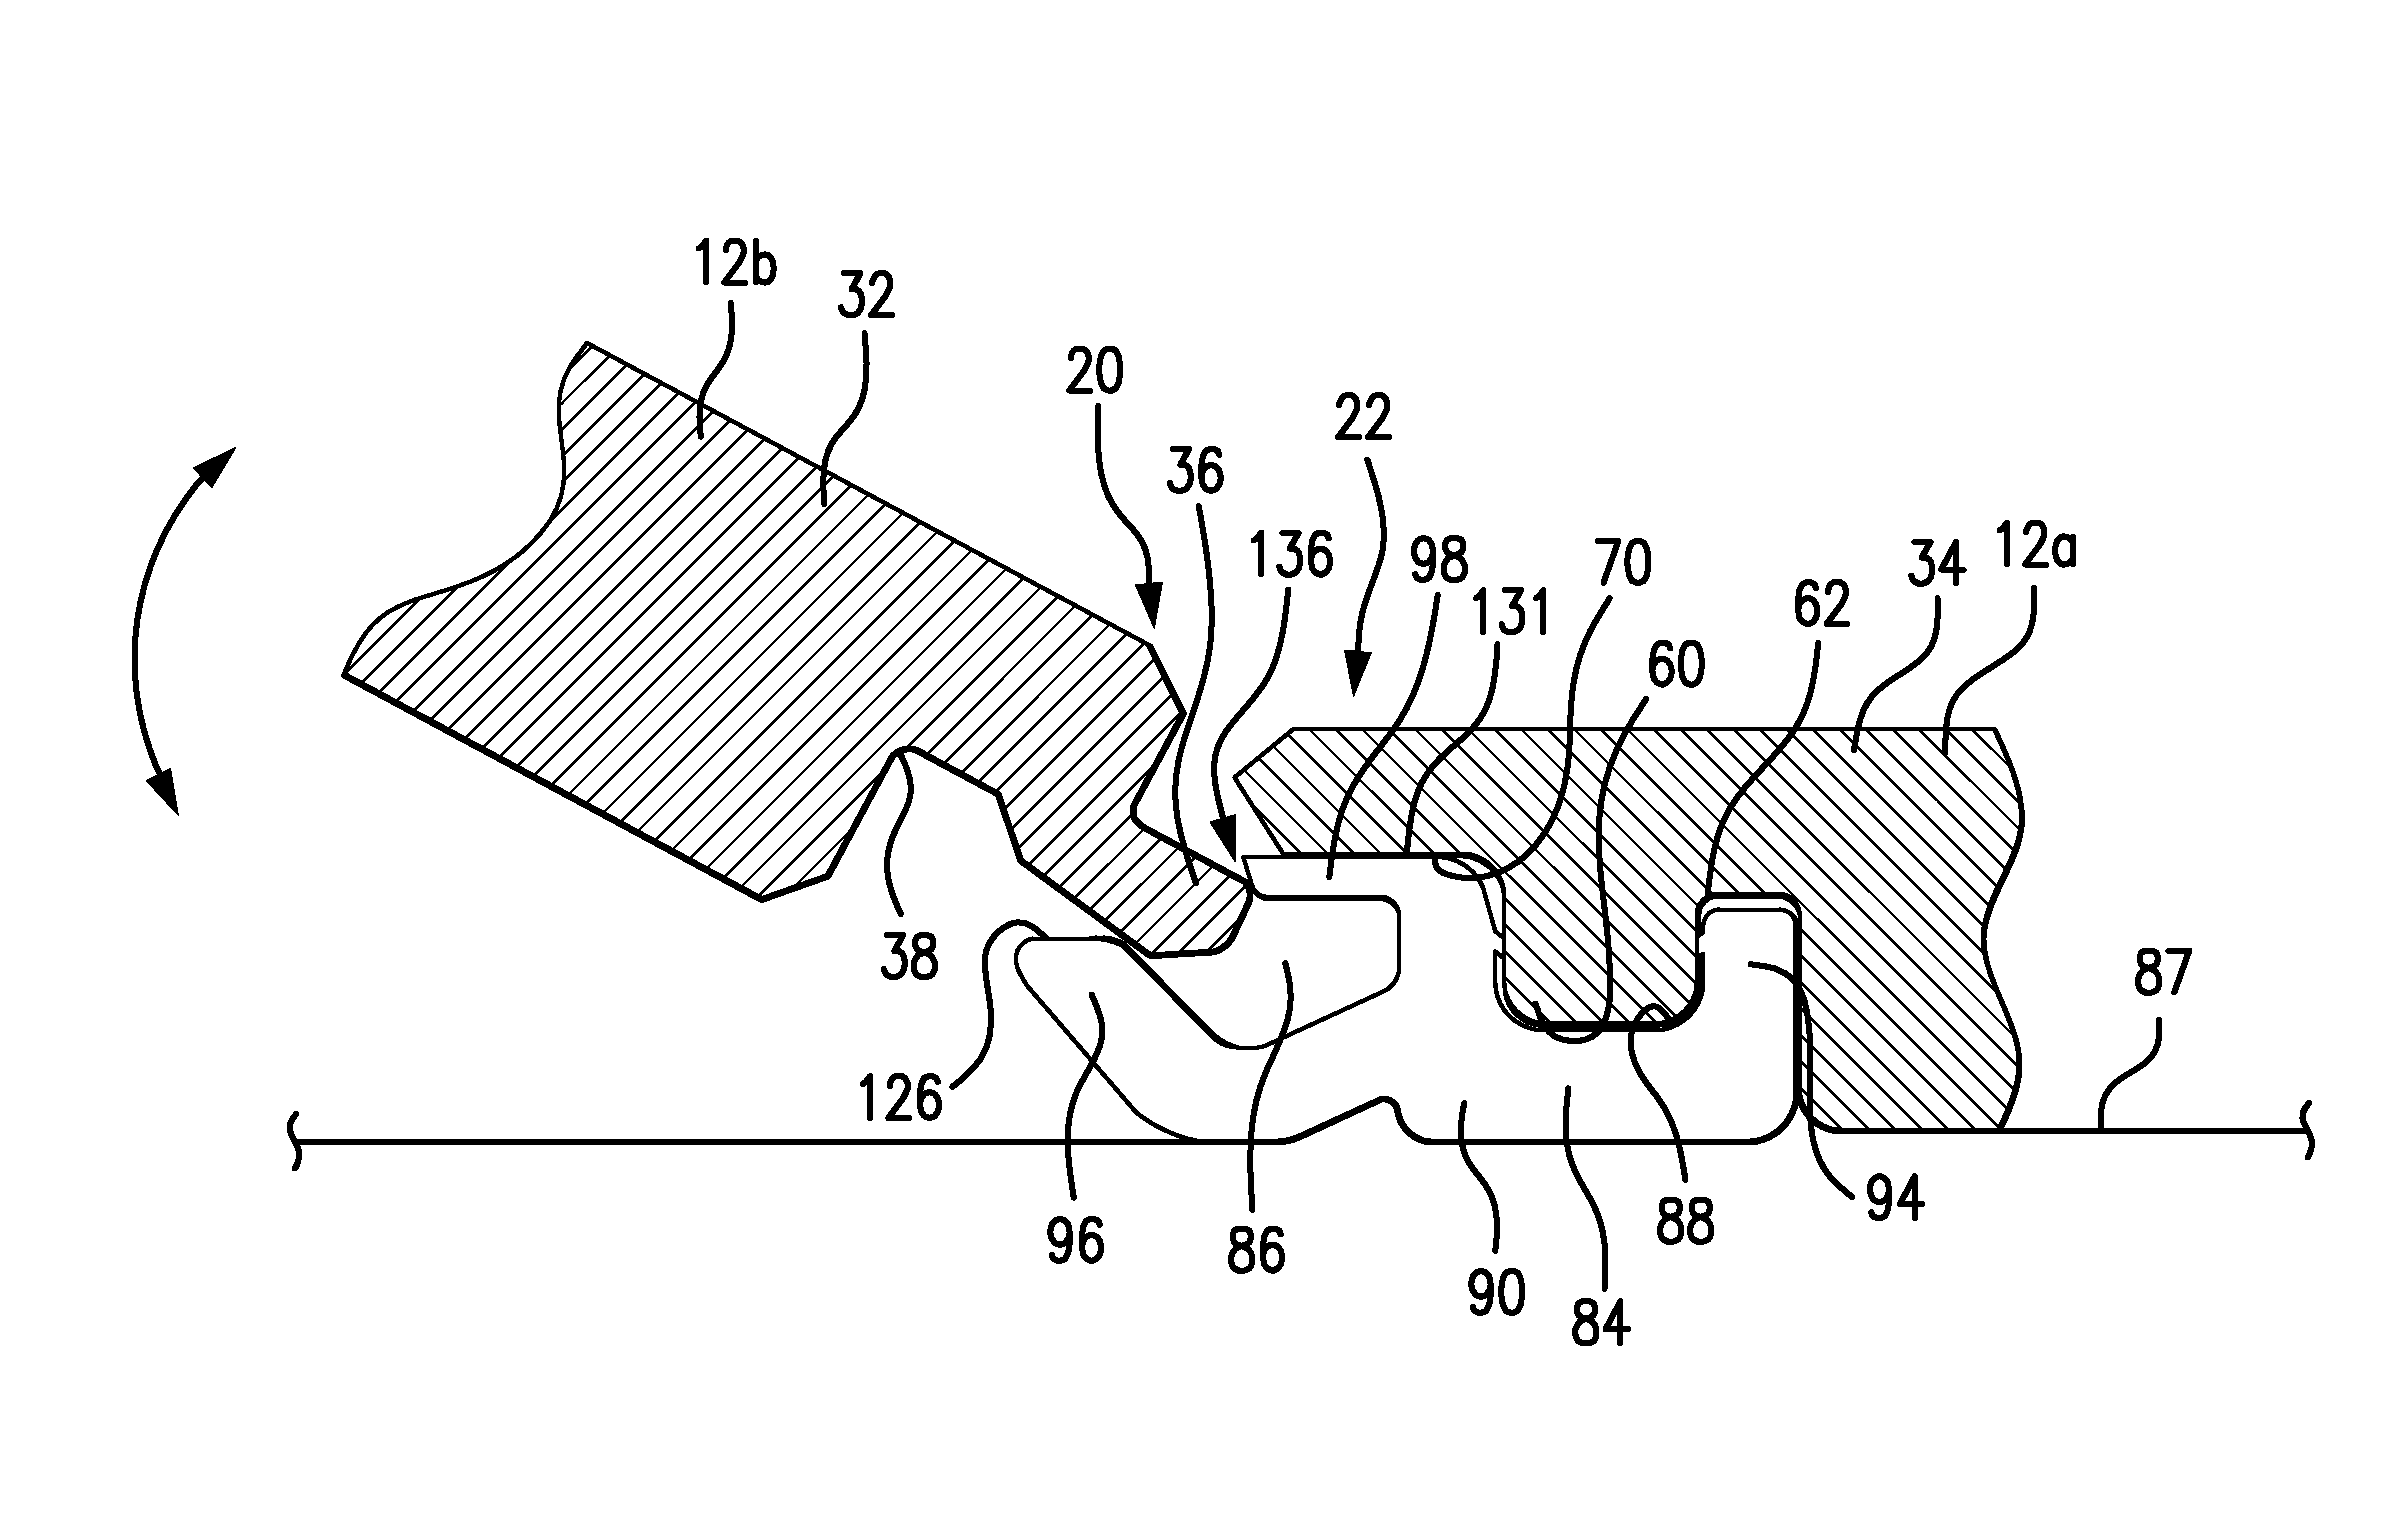 Connecting system for surface coverings